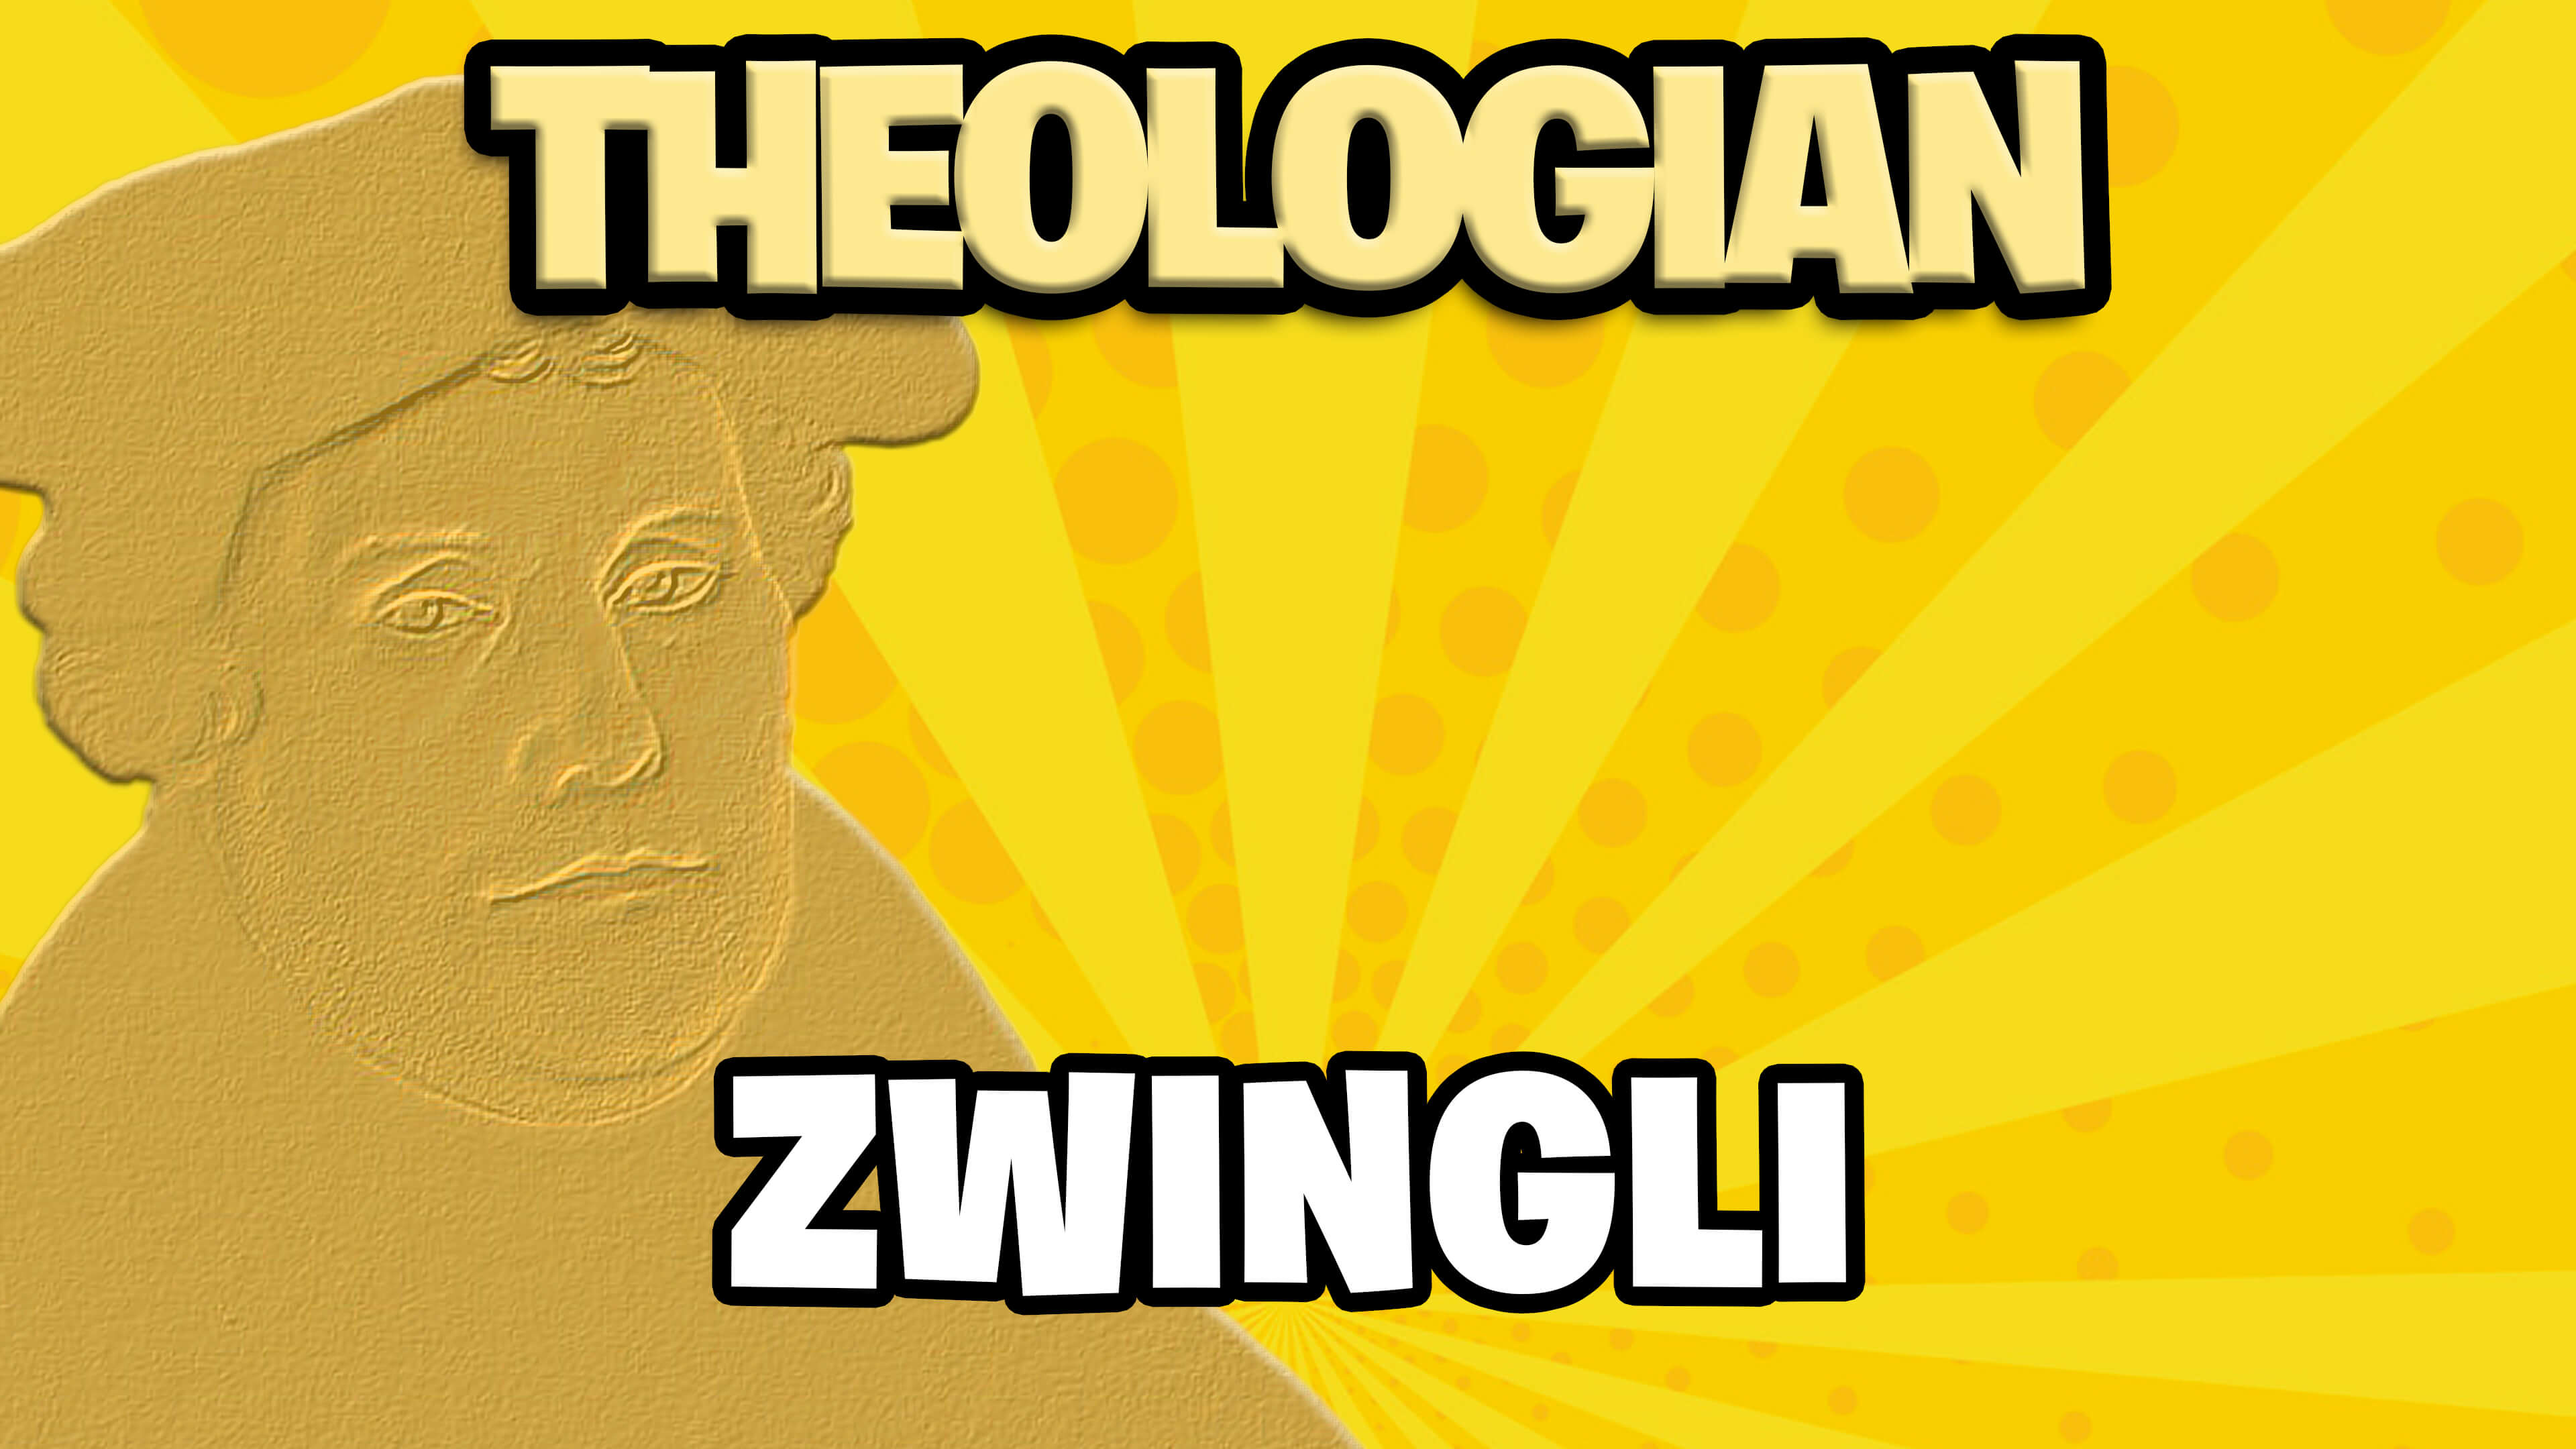 Theologian or Cheese